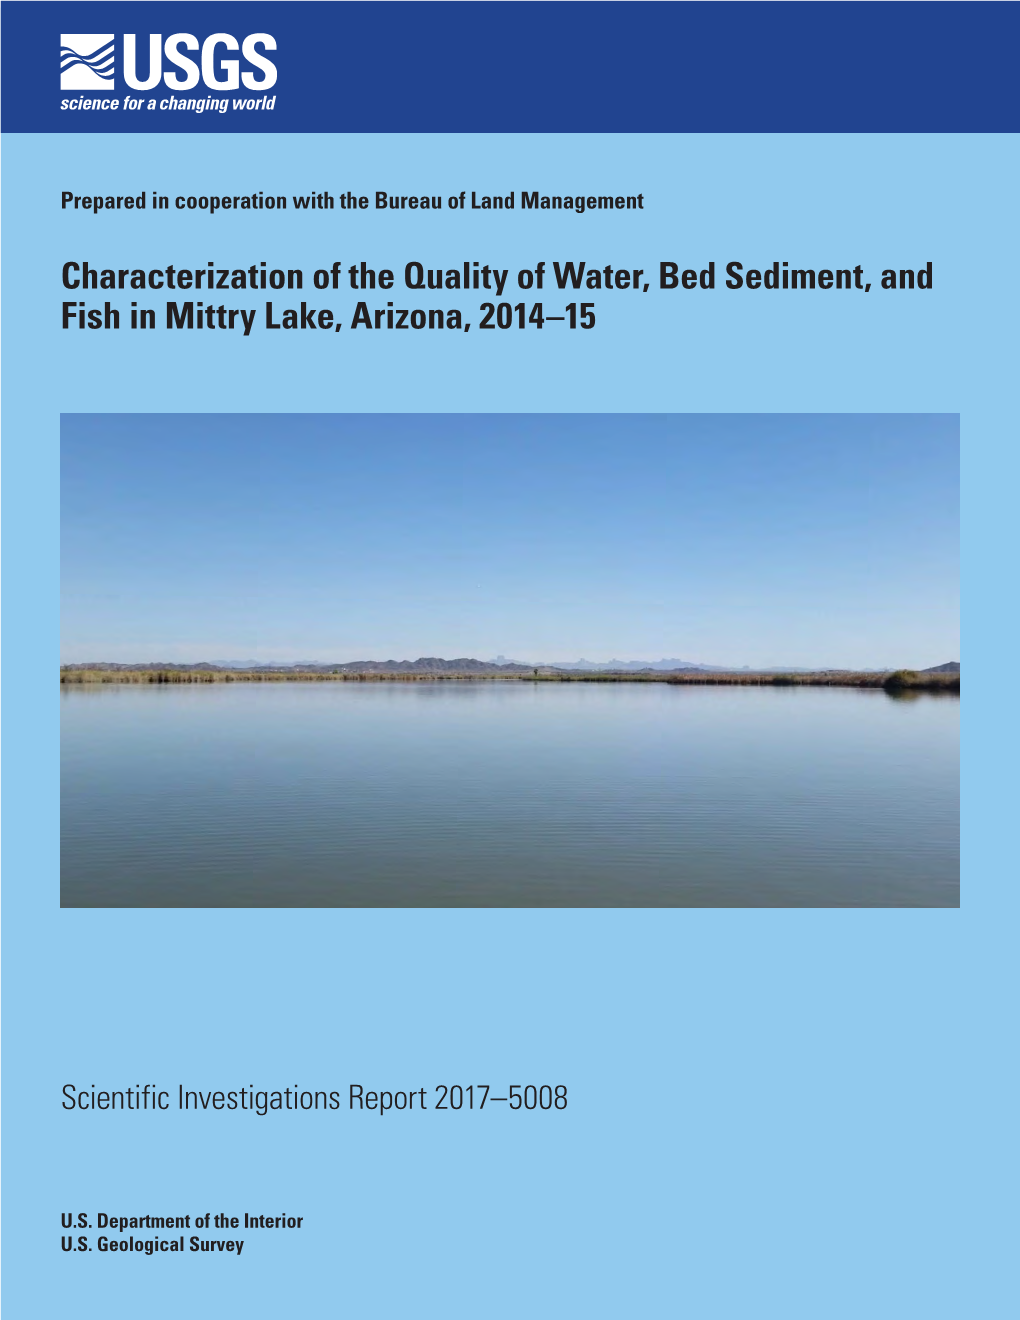 Characterization of the Quality of Water, Bed Sediment, and Fish in Mittry Lake, Arizona, 2014–15